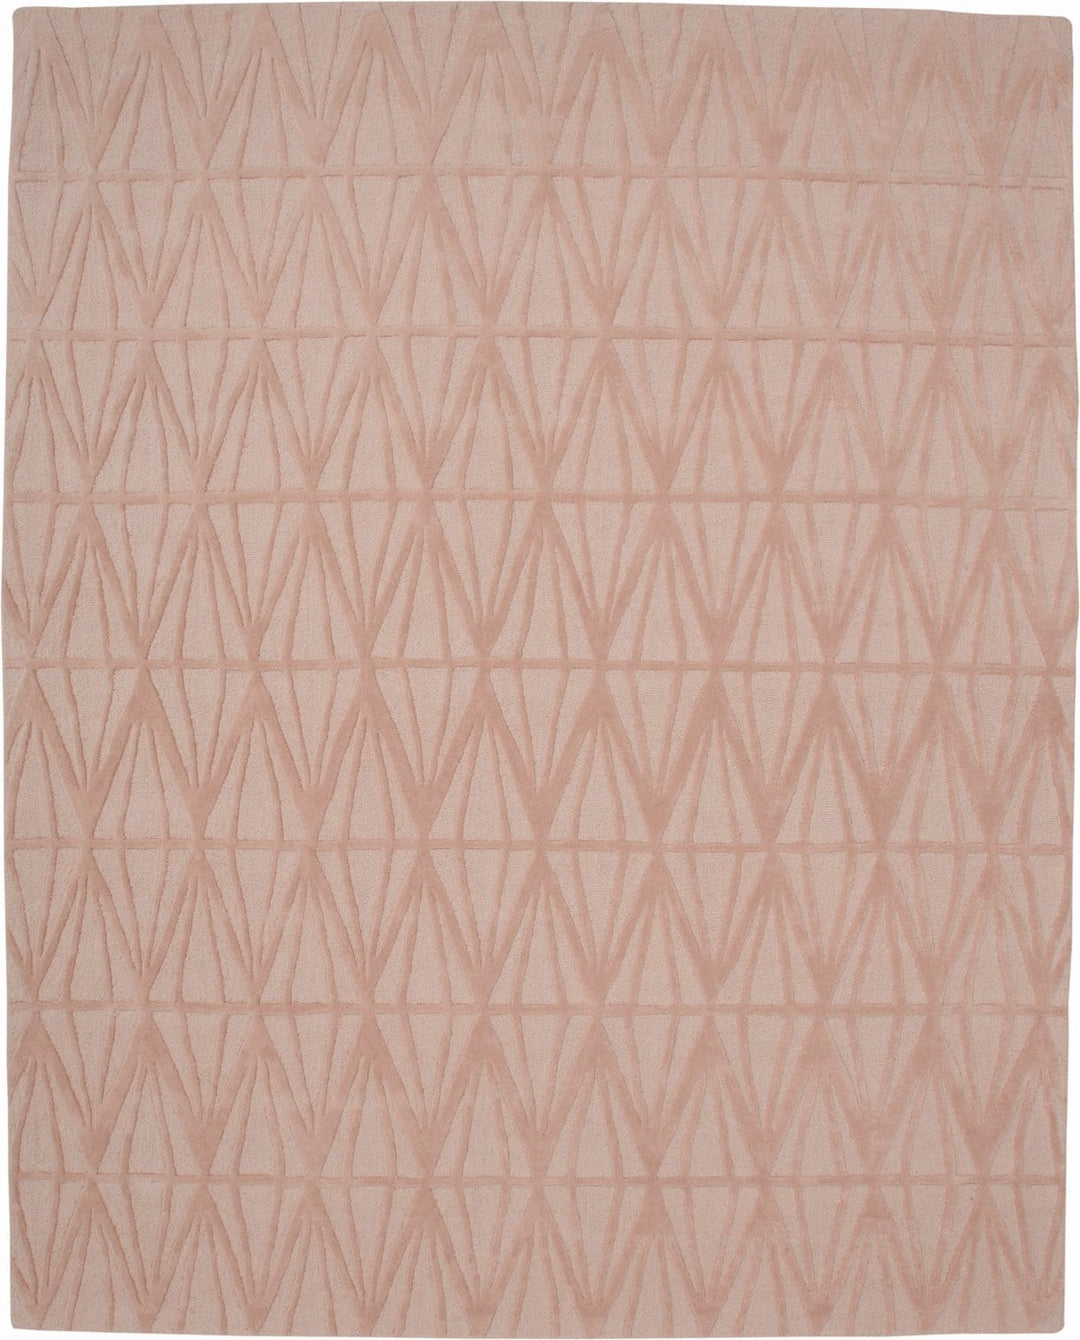 Feizy Feizy Urban Living Glamorous Diamond Wool Rug - Blush Pink - Available in 2 Sizes